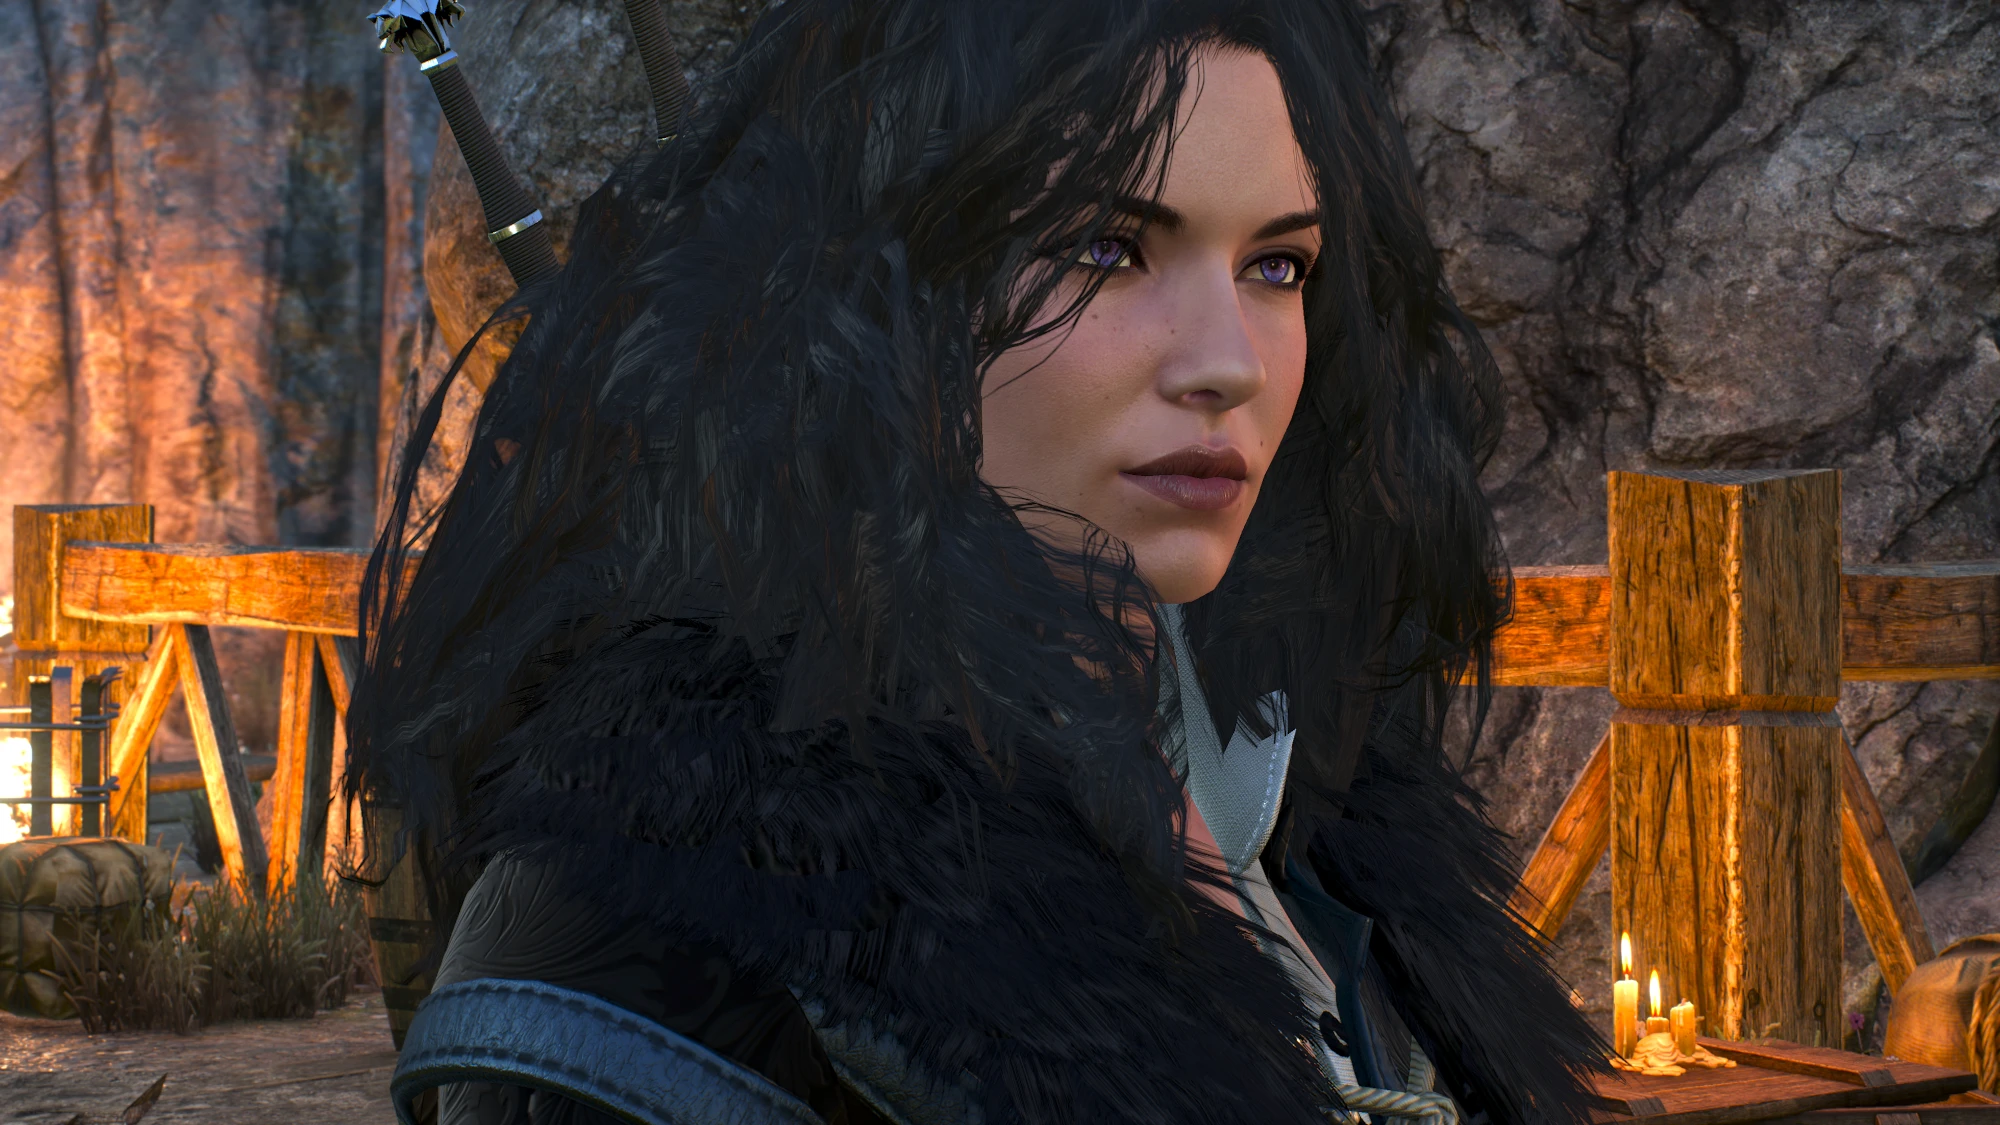 Yennefer of vengerberg the witcher 3 voiced standalone follower se фото 7